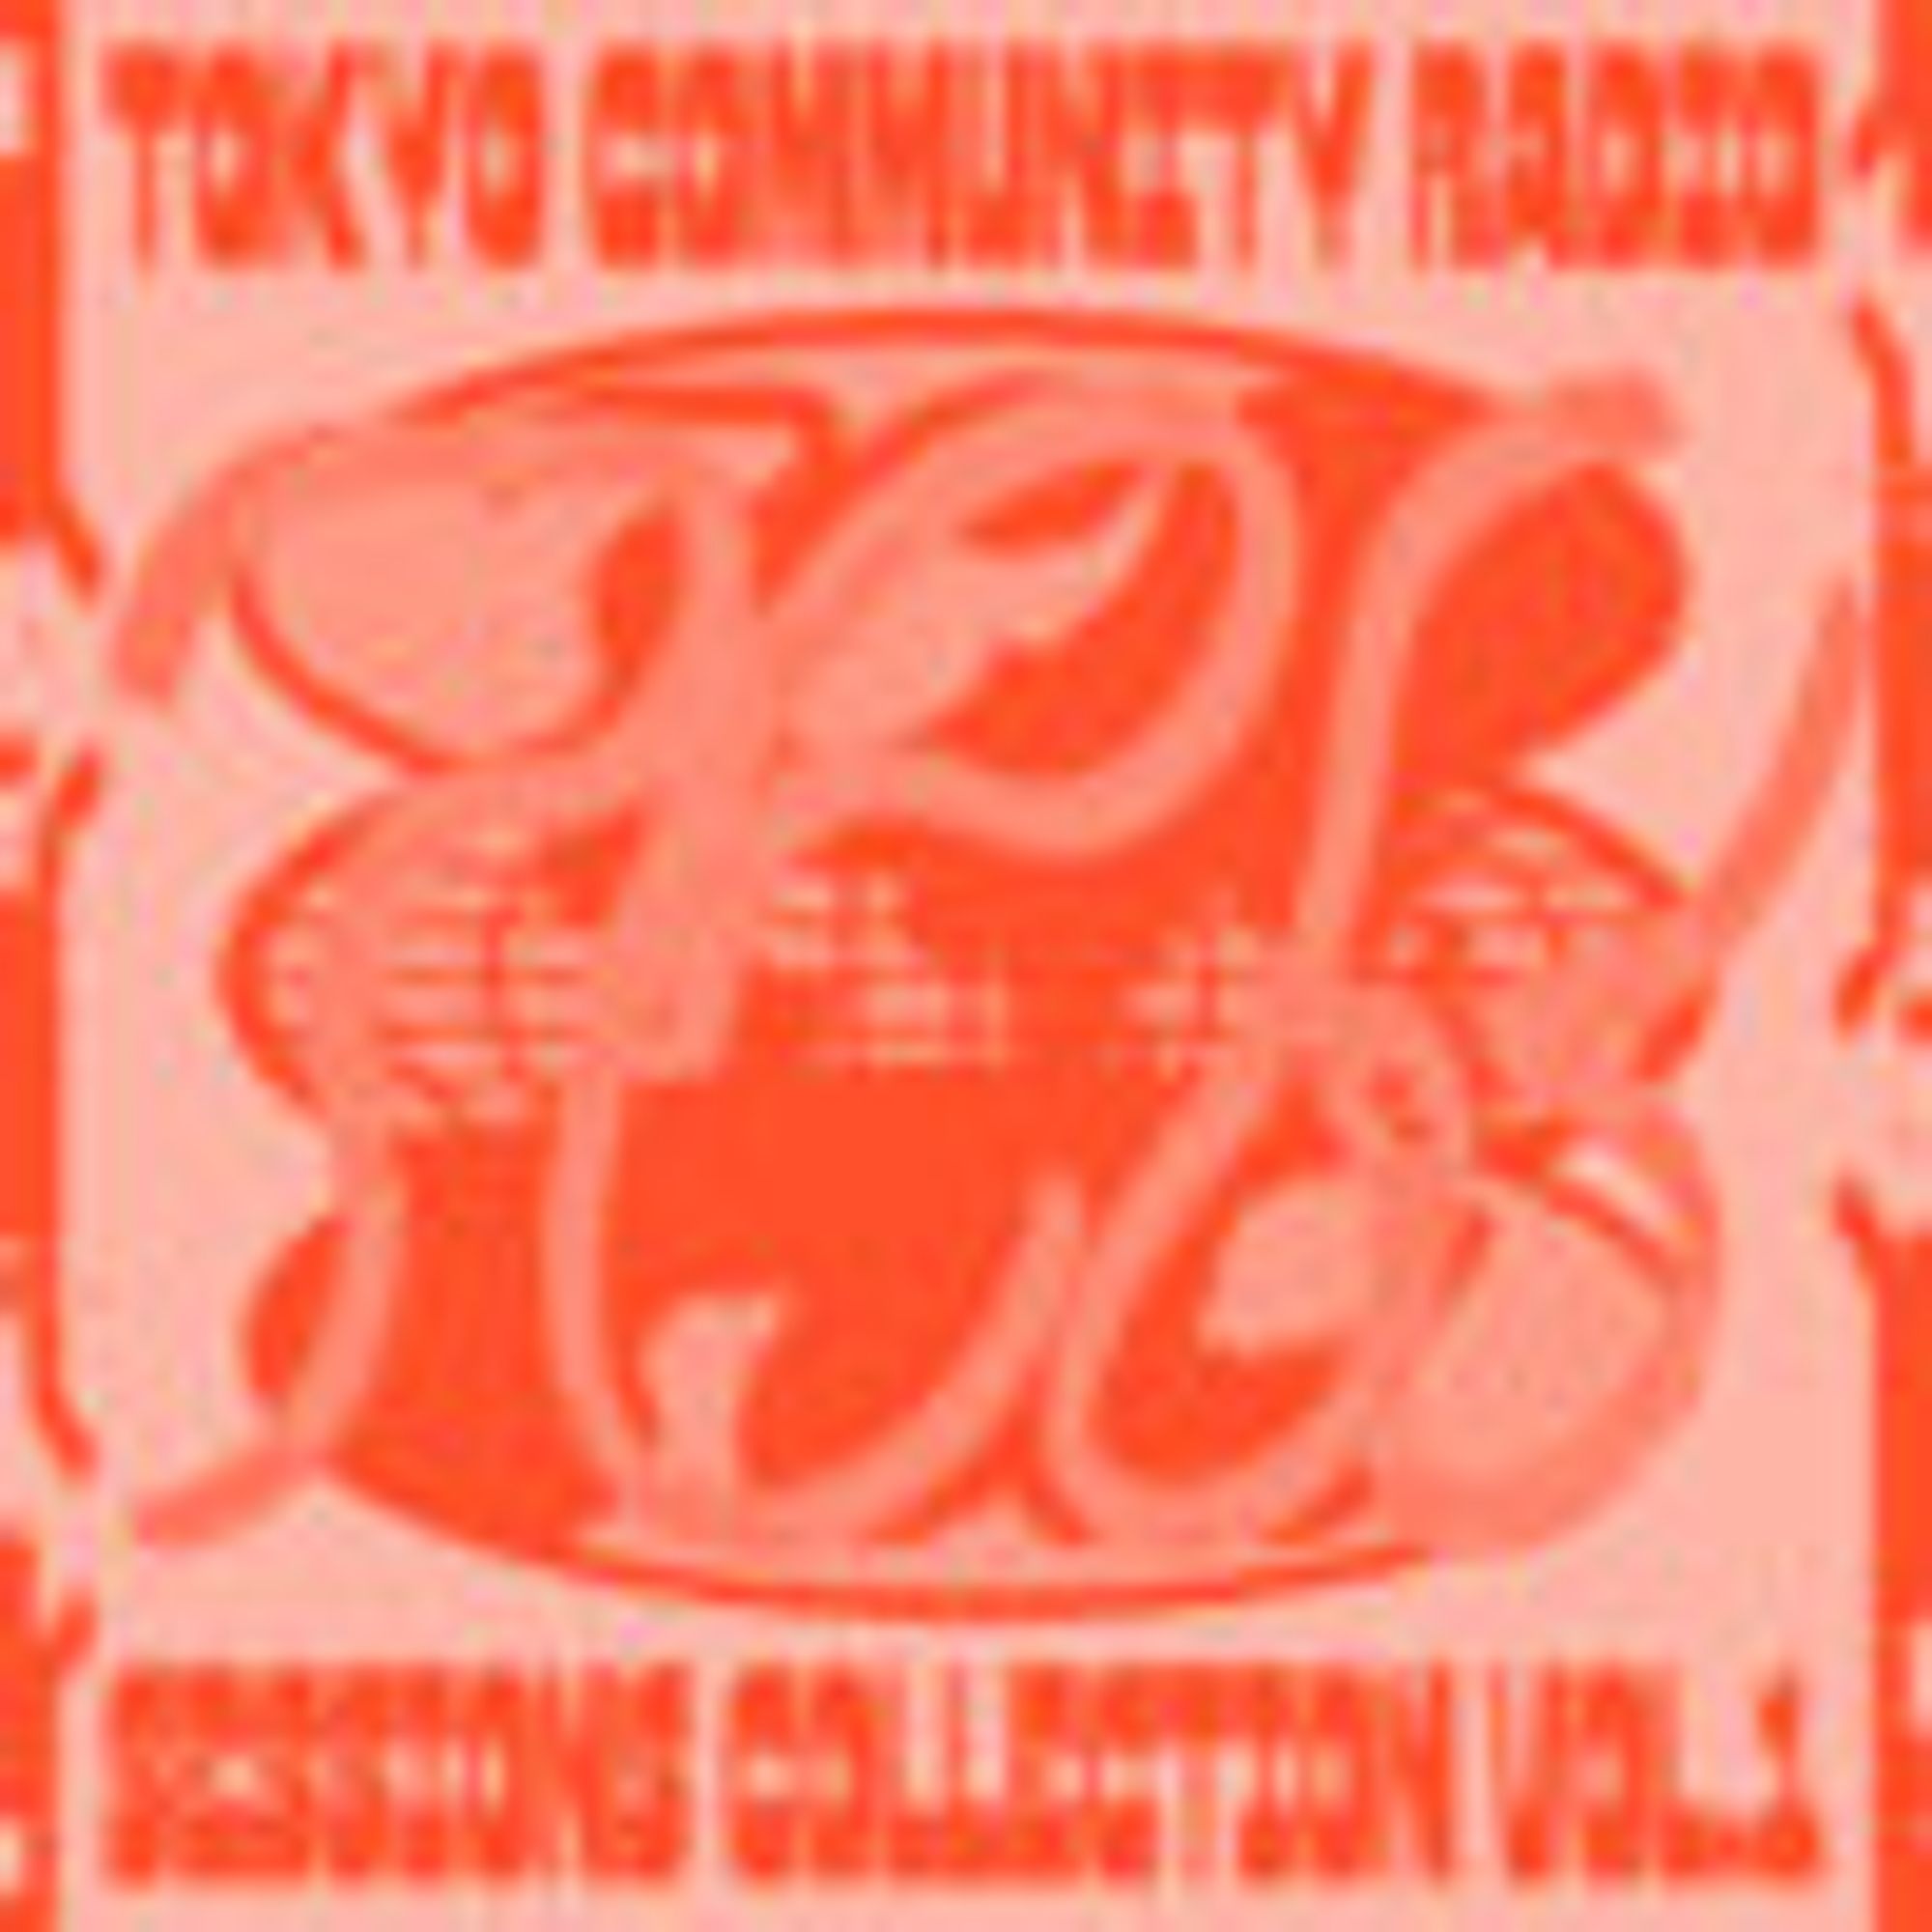 SESSIONS COLLECTION VOL.1, by Tokyo Community Radio